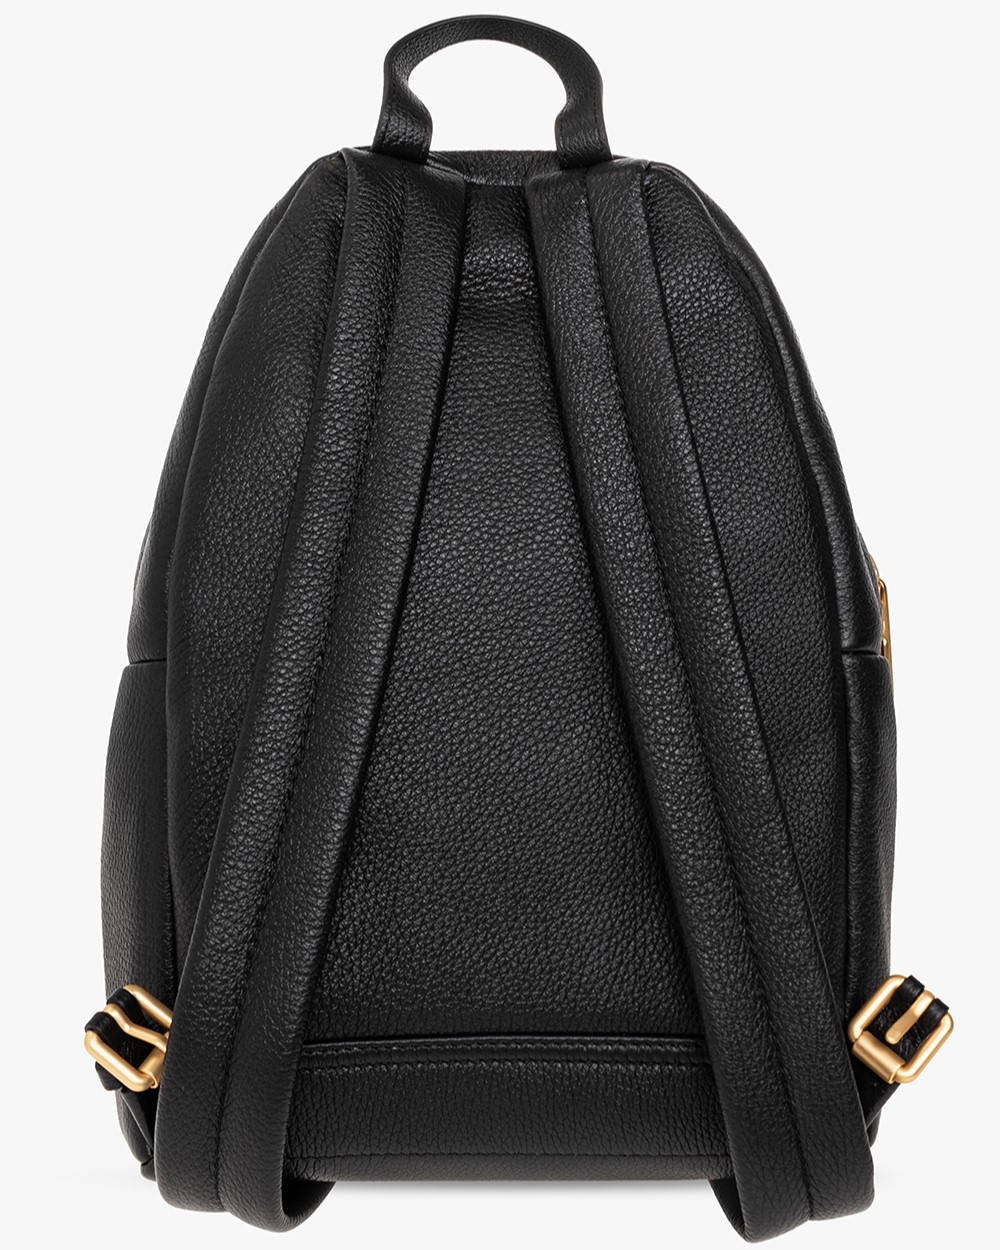 BALO NỮ MOSCHINO BLACK LEATHER BACKPACK WITH LOGO 1